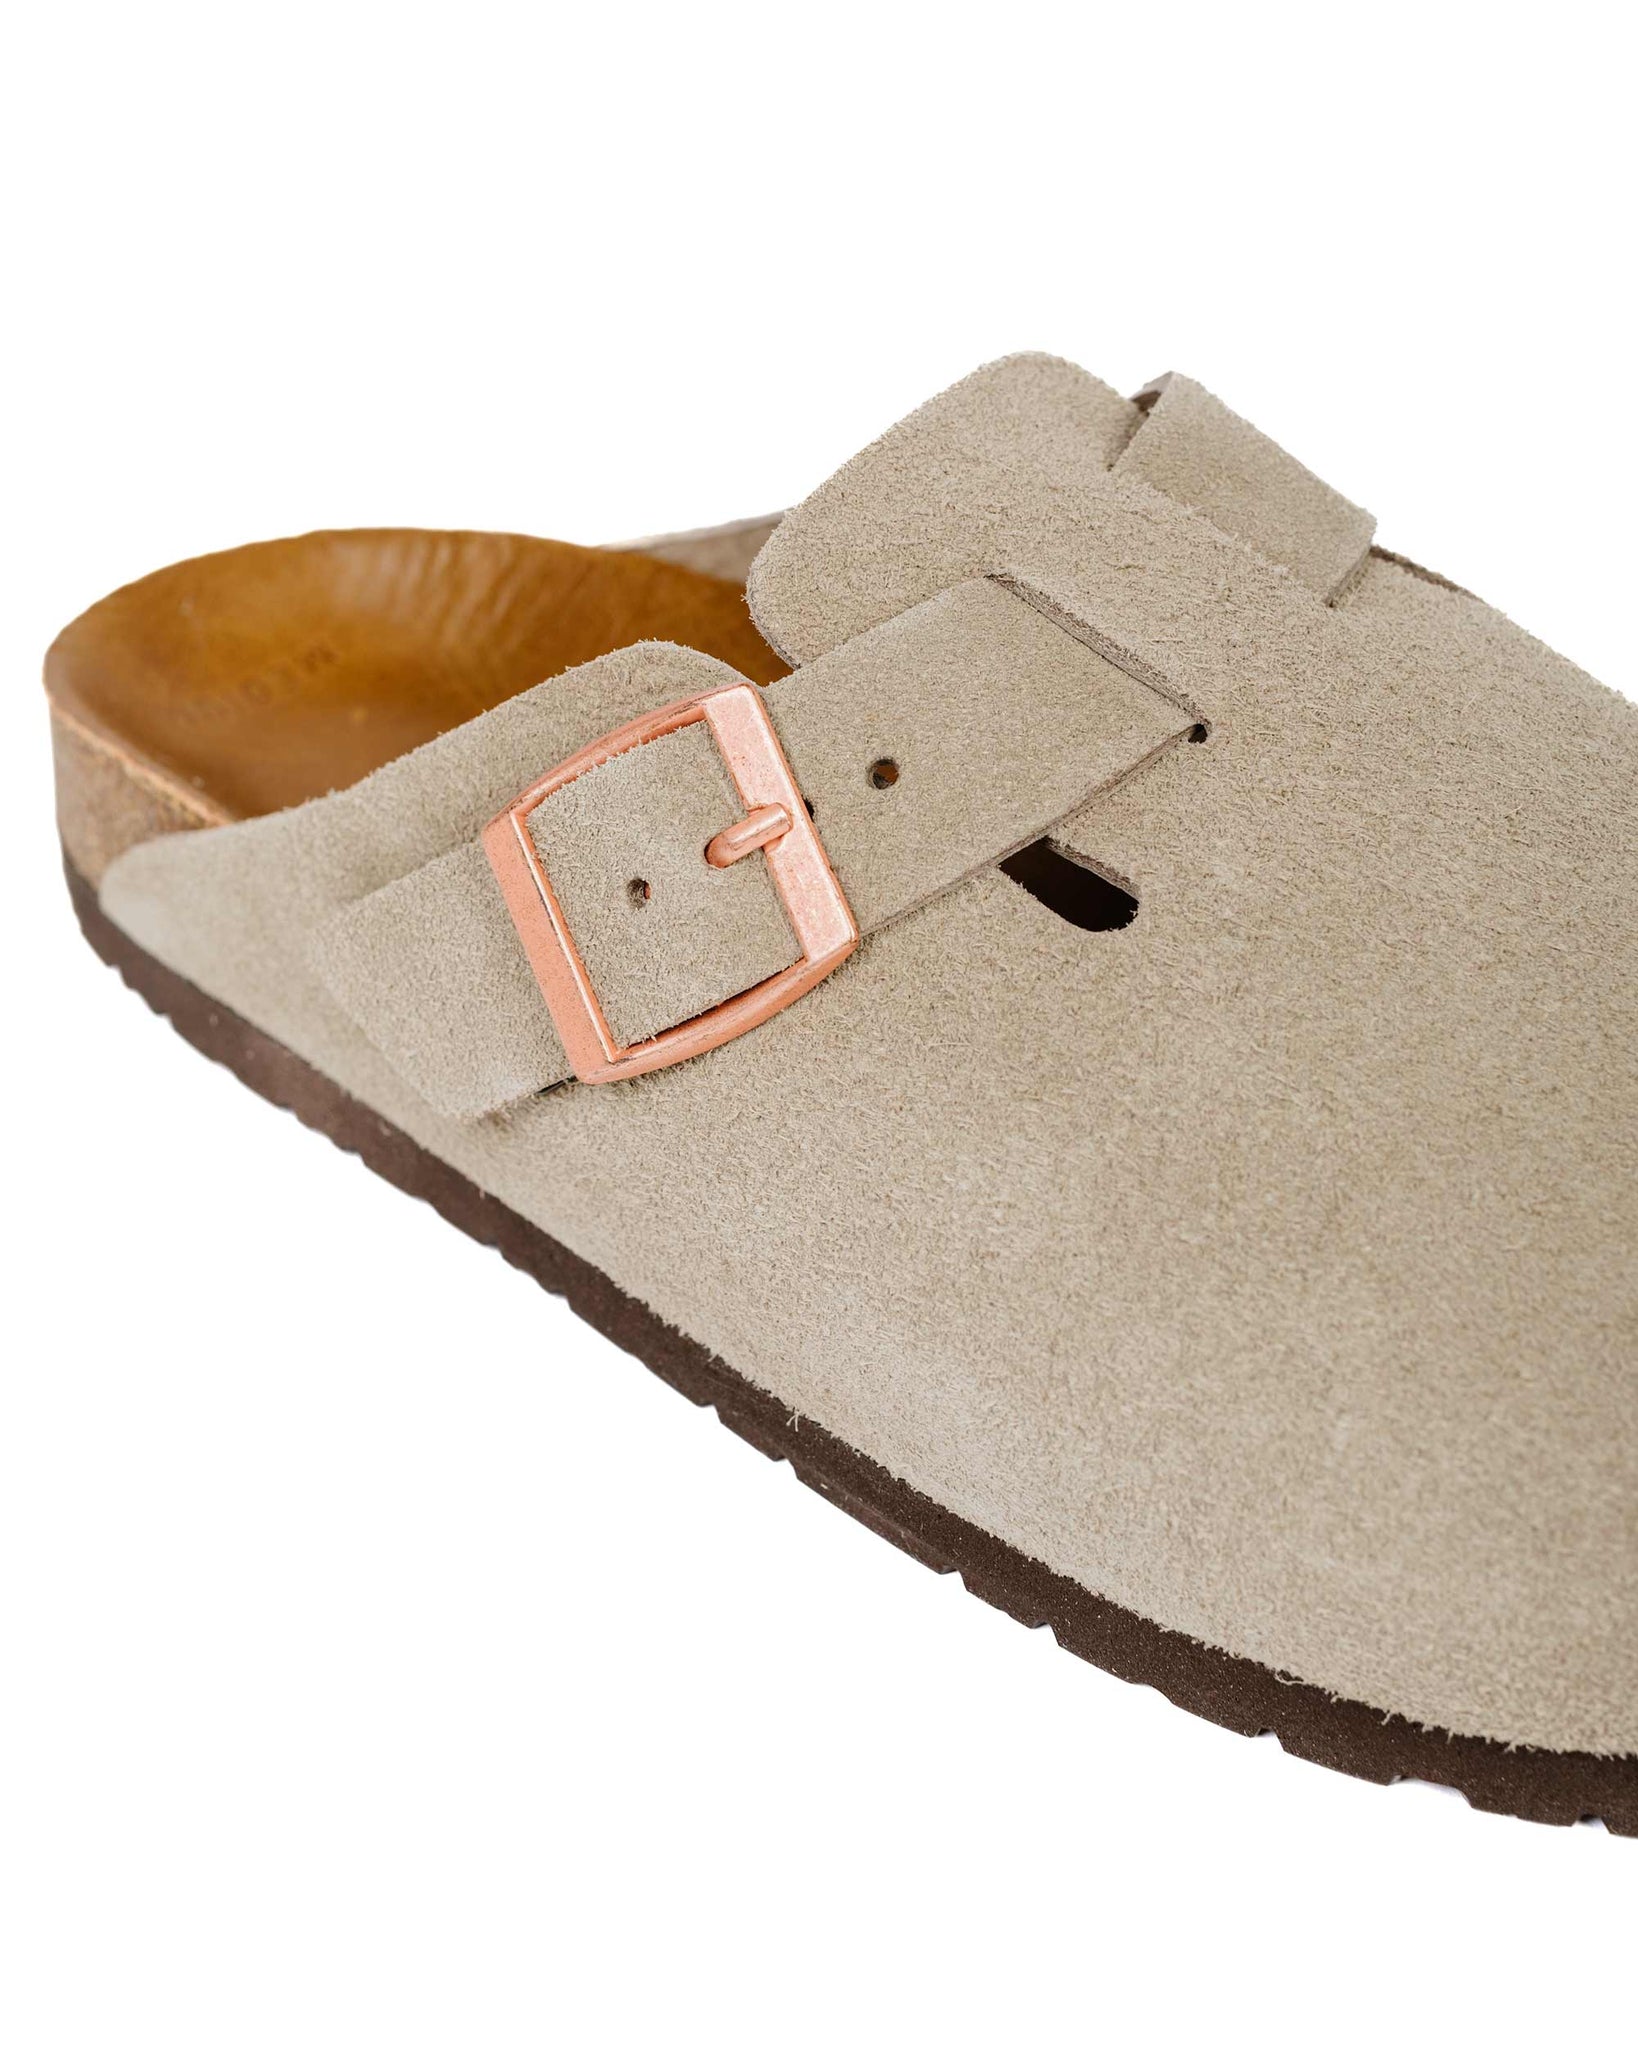 The Real McCoy's MA23012 Leather Foot-Support Clogs Taupe Close Up